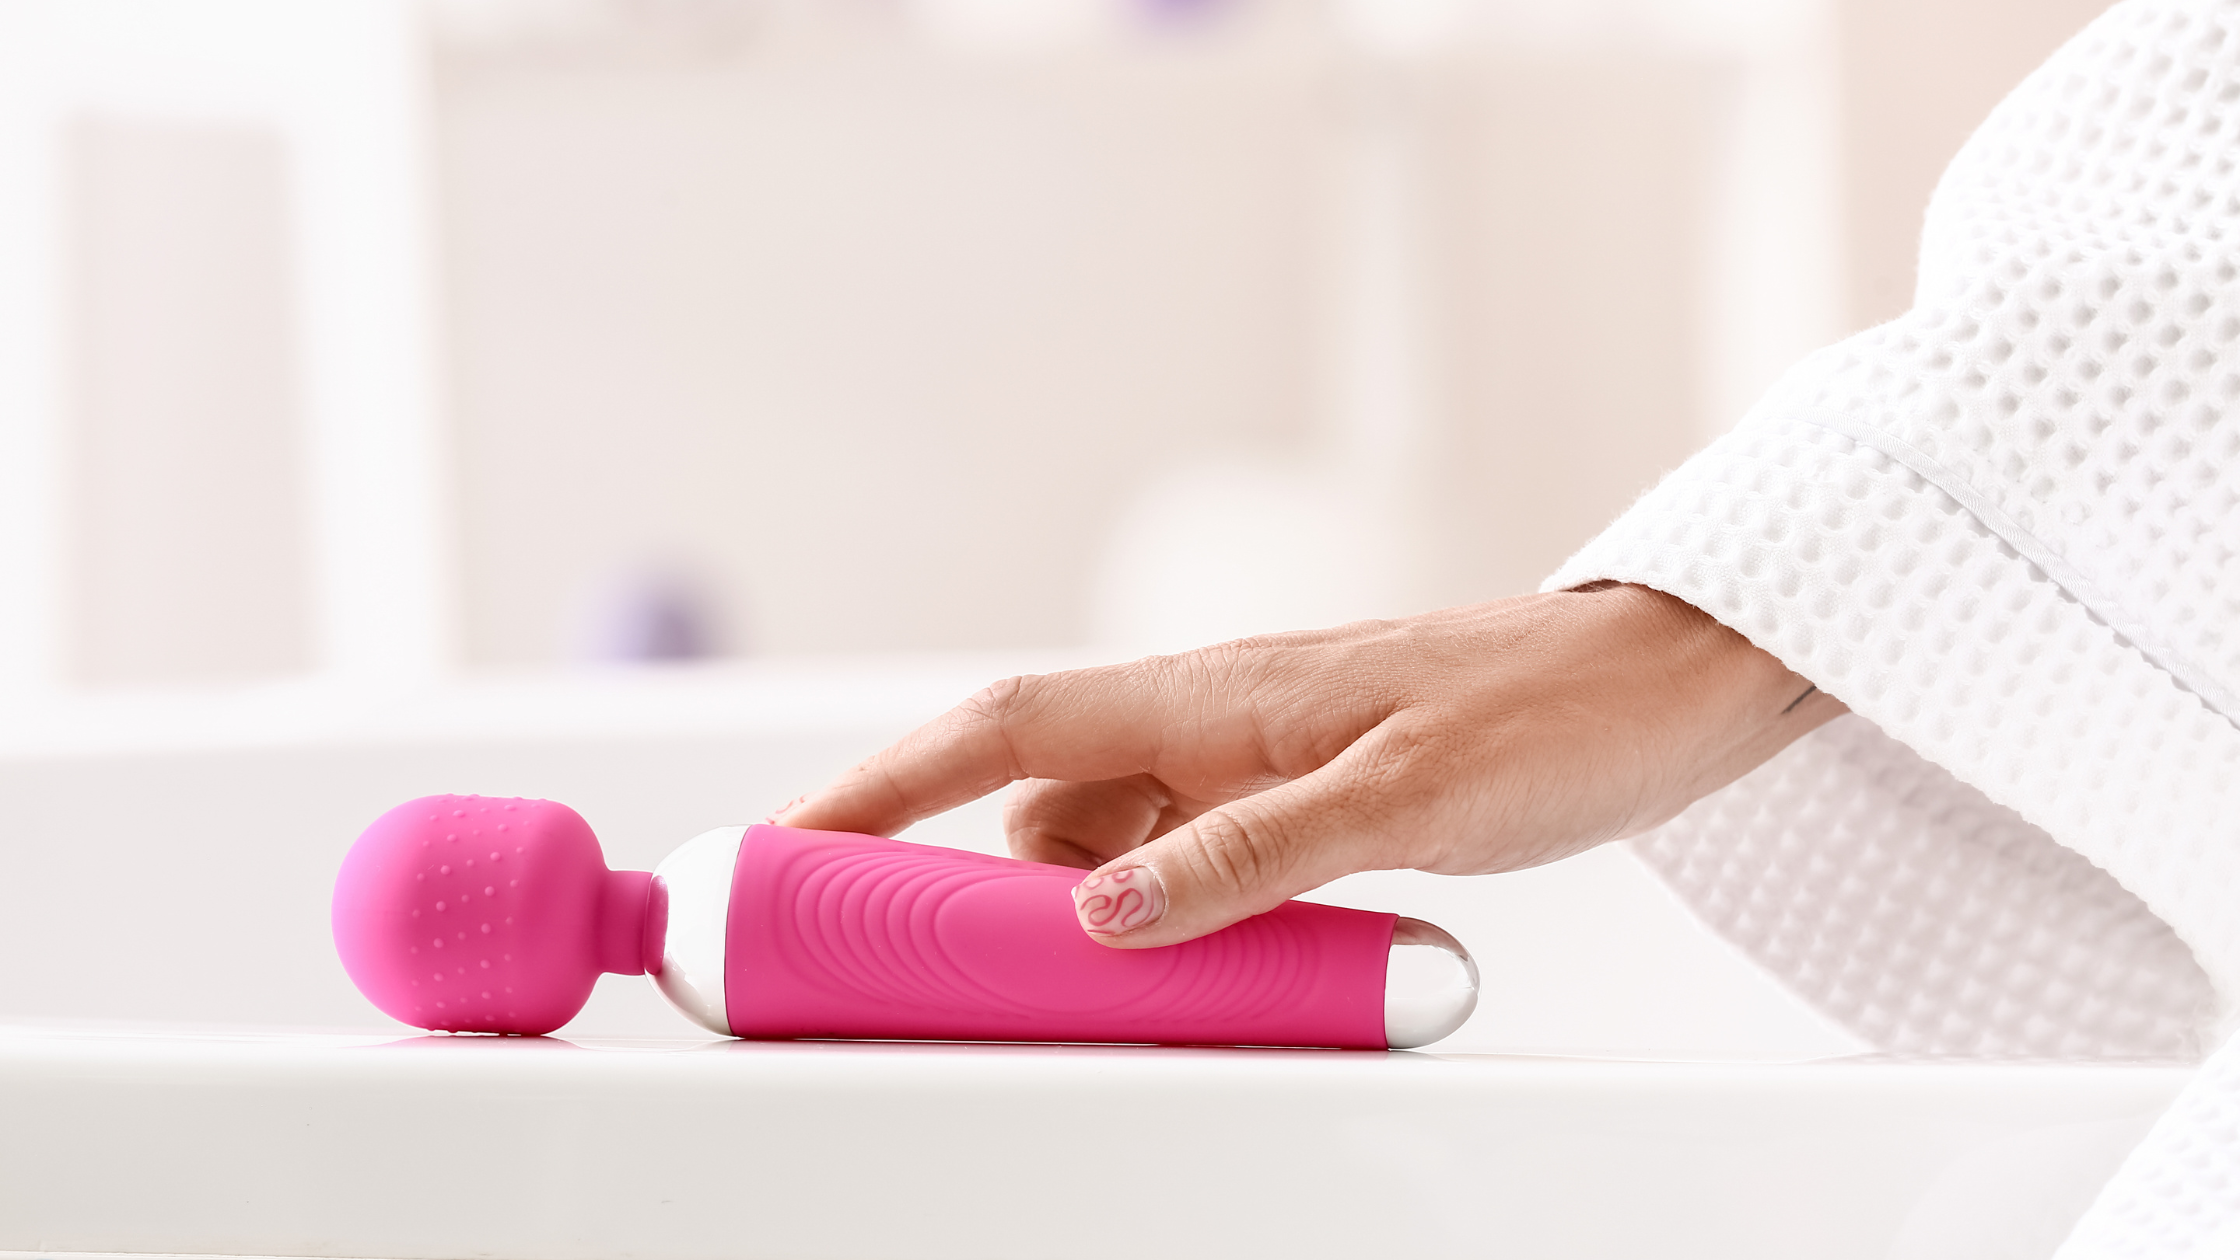 How to use a vibrator for the first time